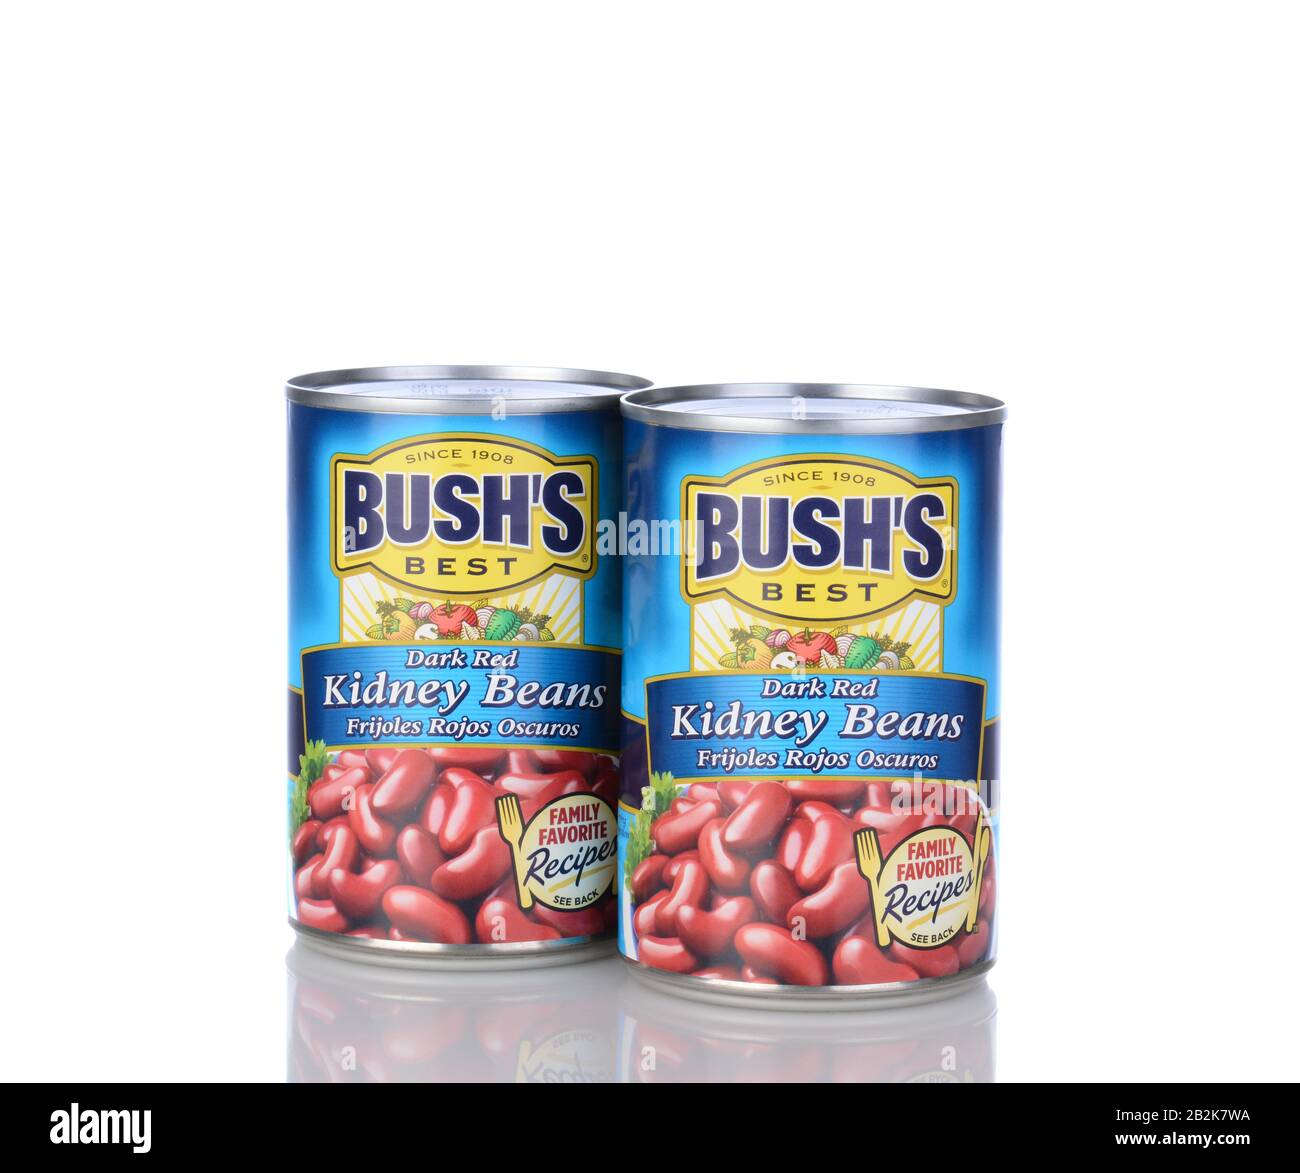 IRVINE, CA - January 05, 2014: Two cans of Bushs Dark Red Kidney Beans. Bush's has been canning beans since 1908, currently with a product line of ove Stock Photo